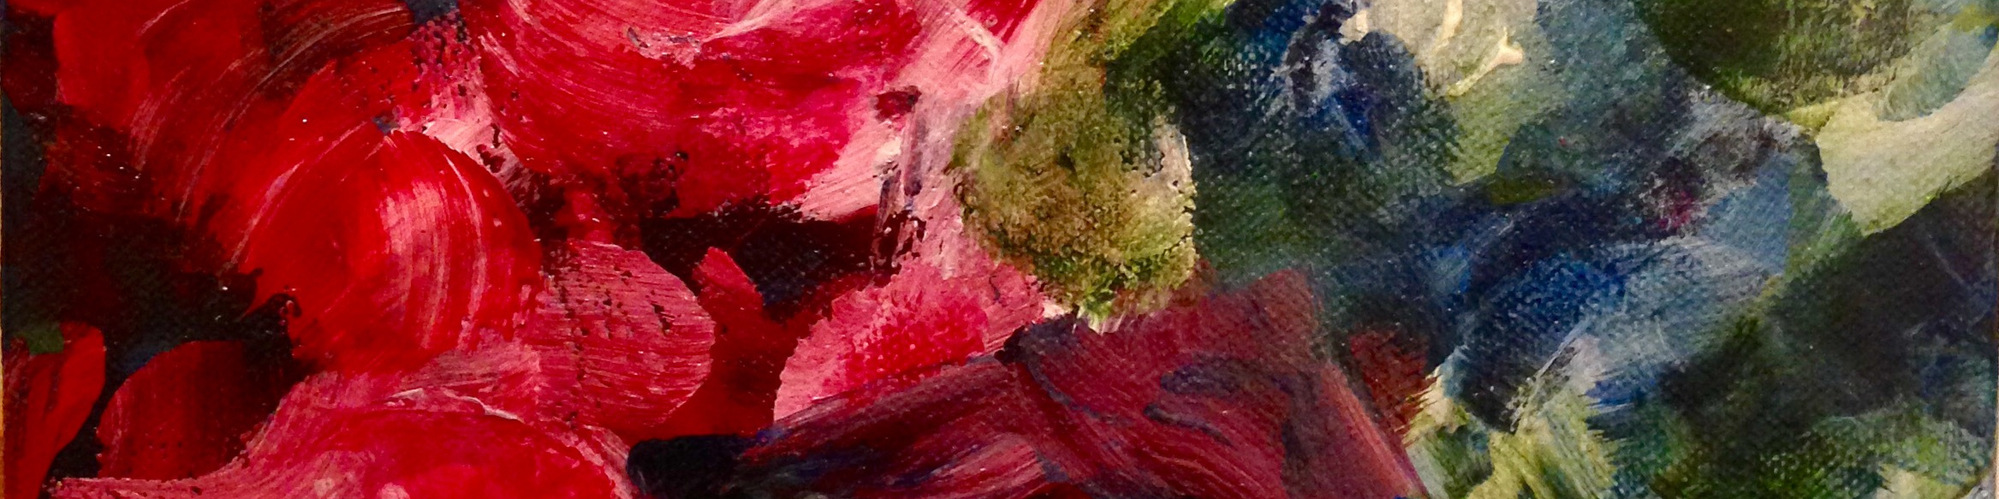 Abstract rose painting by Chelsey Kamen_acrylic paint